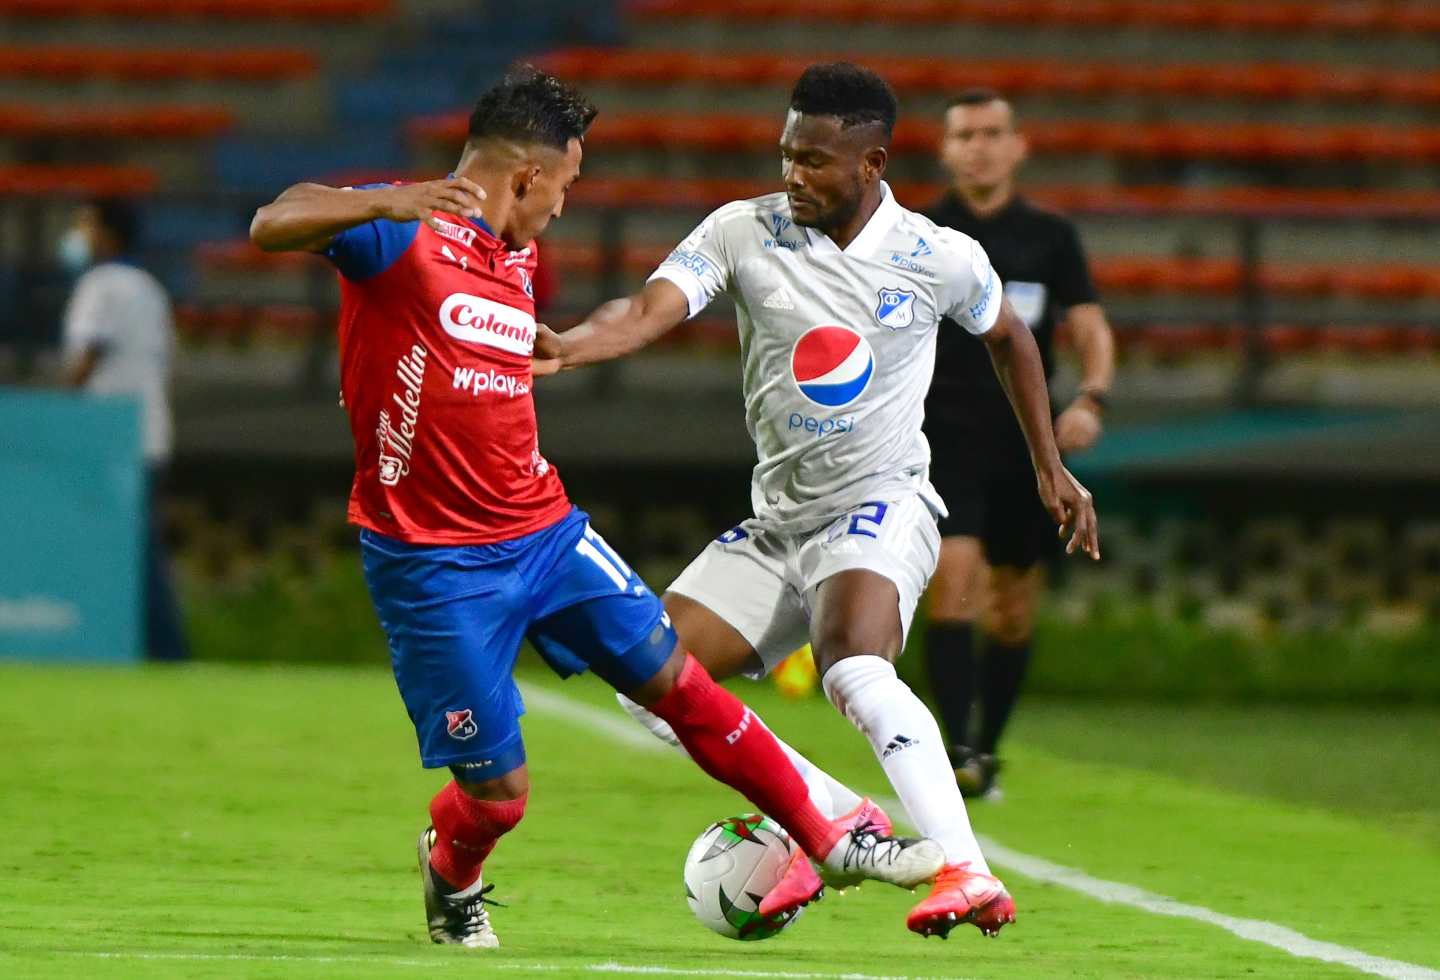 BetPlay League: Medellín and Millonarios tied at the end of the 4th